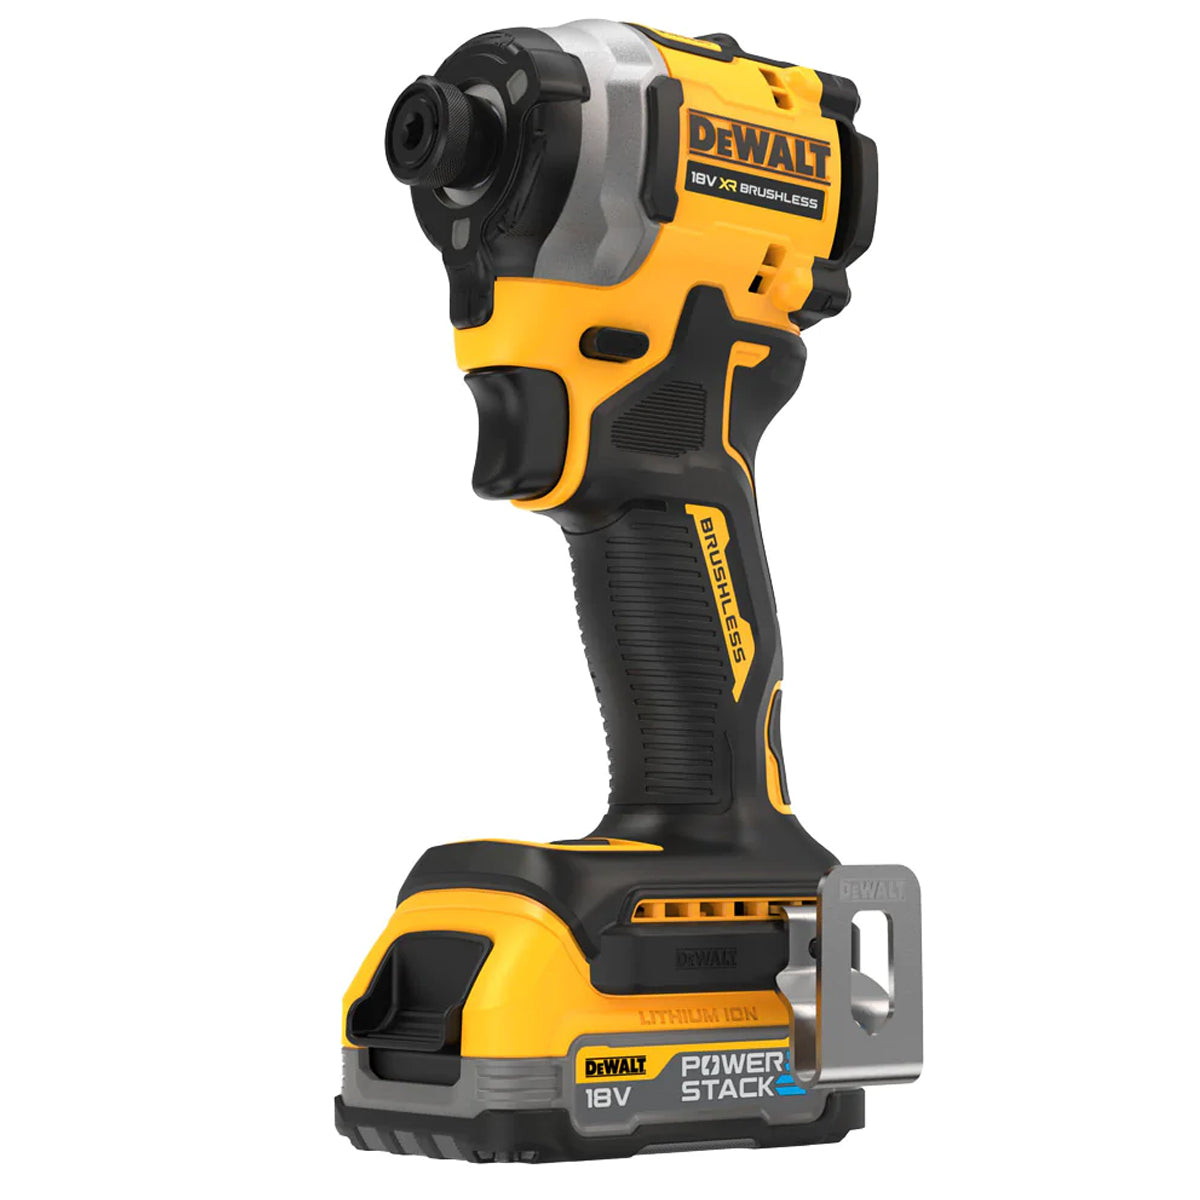 Dewalt DCK2050H2T 18V XR Brushless Combi Drill and Impact Driver with 2 x 5.0Ah Battery & Charger